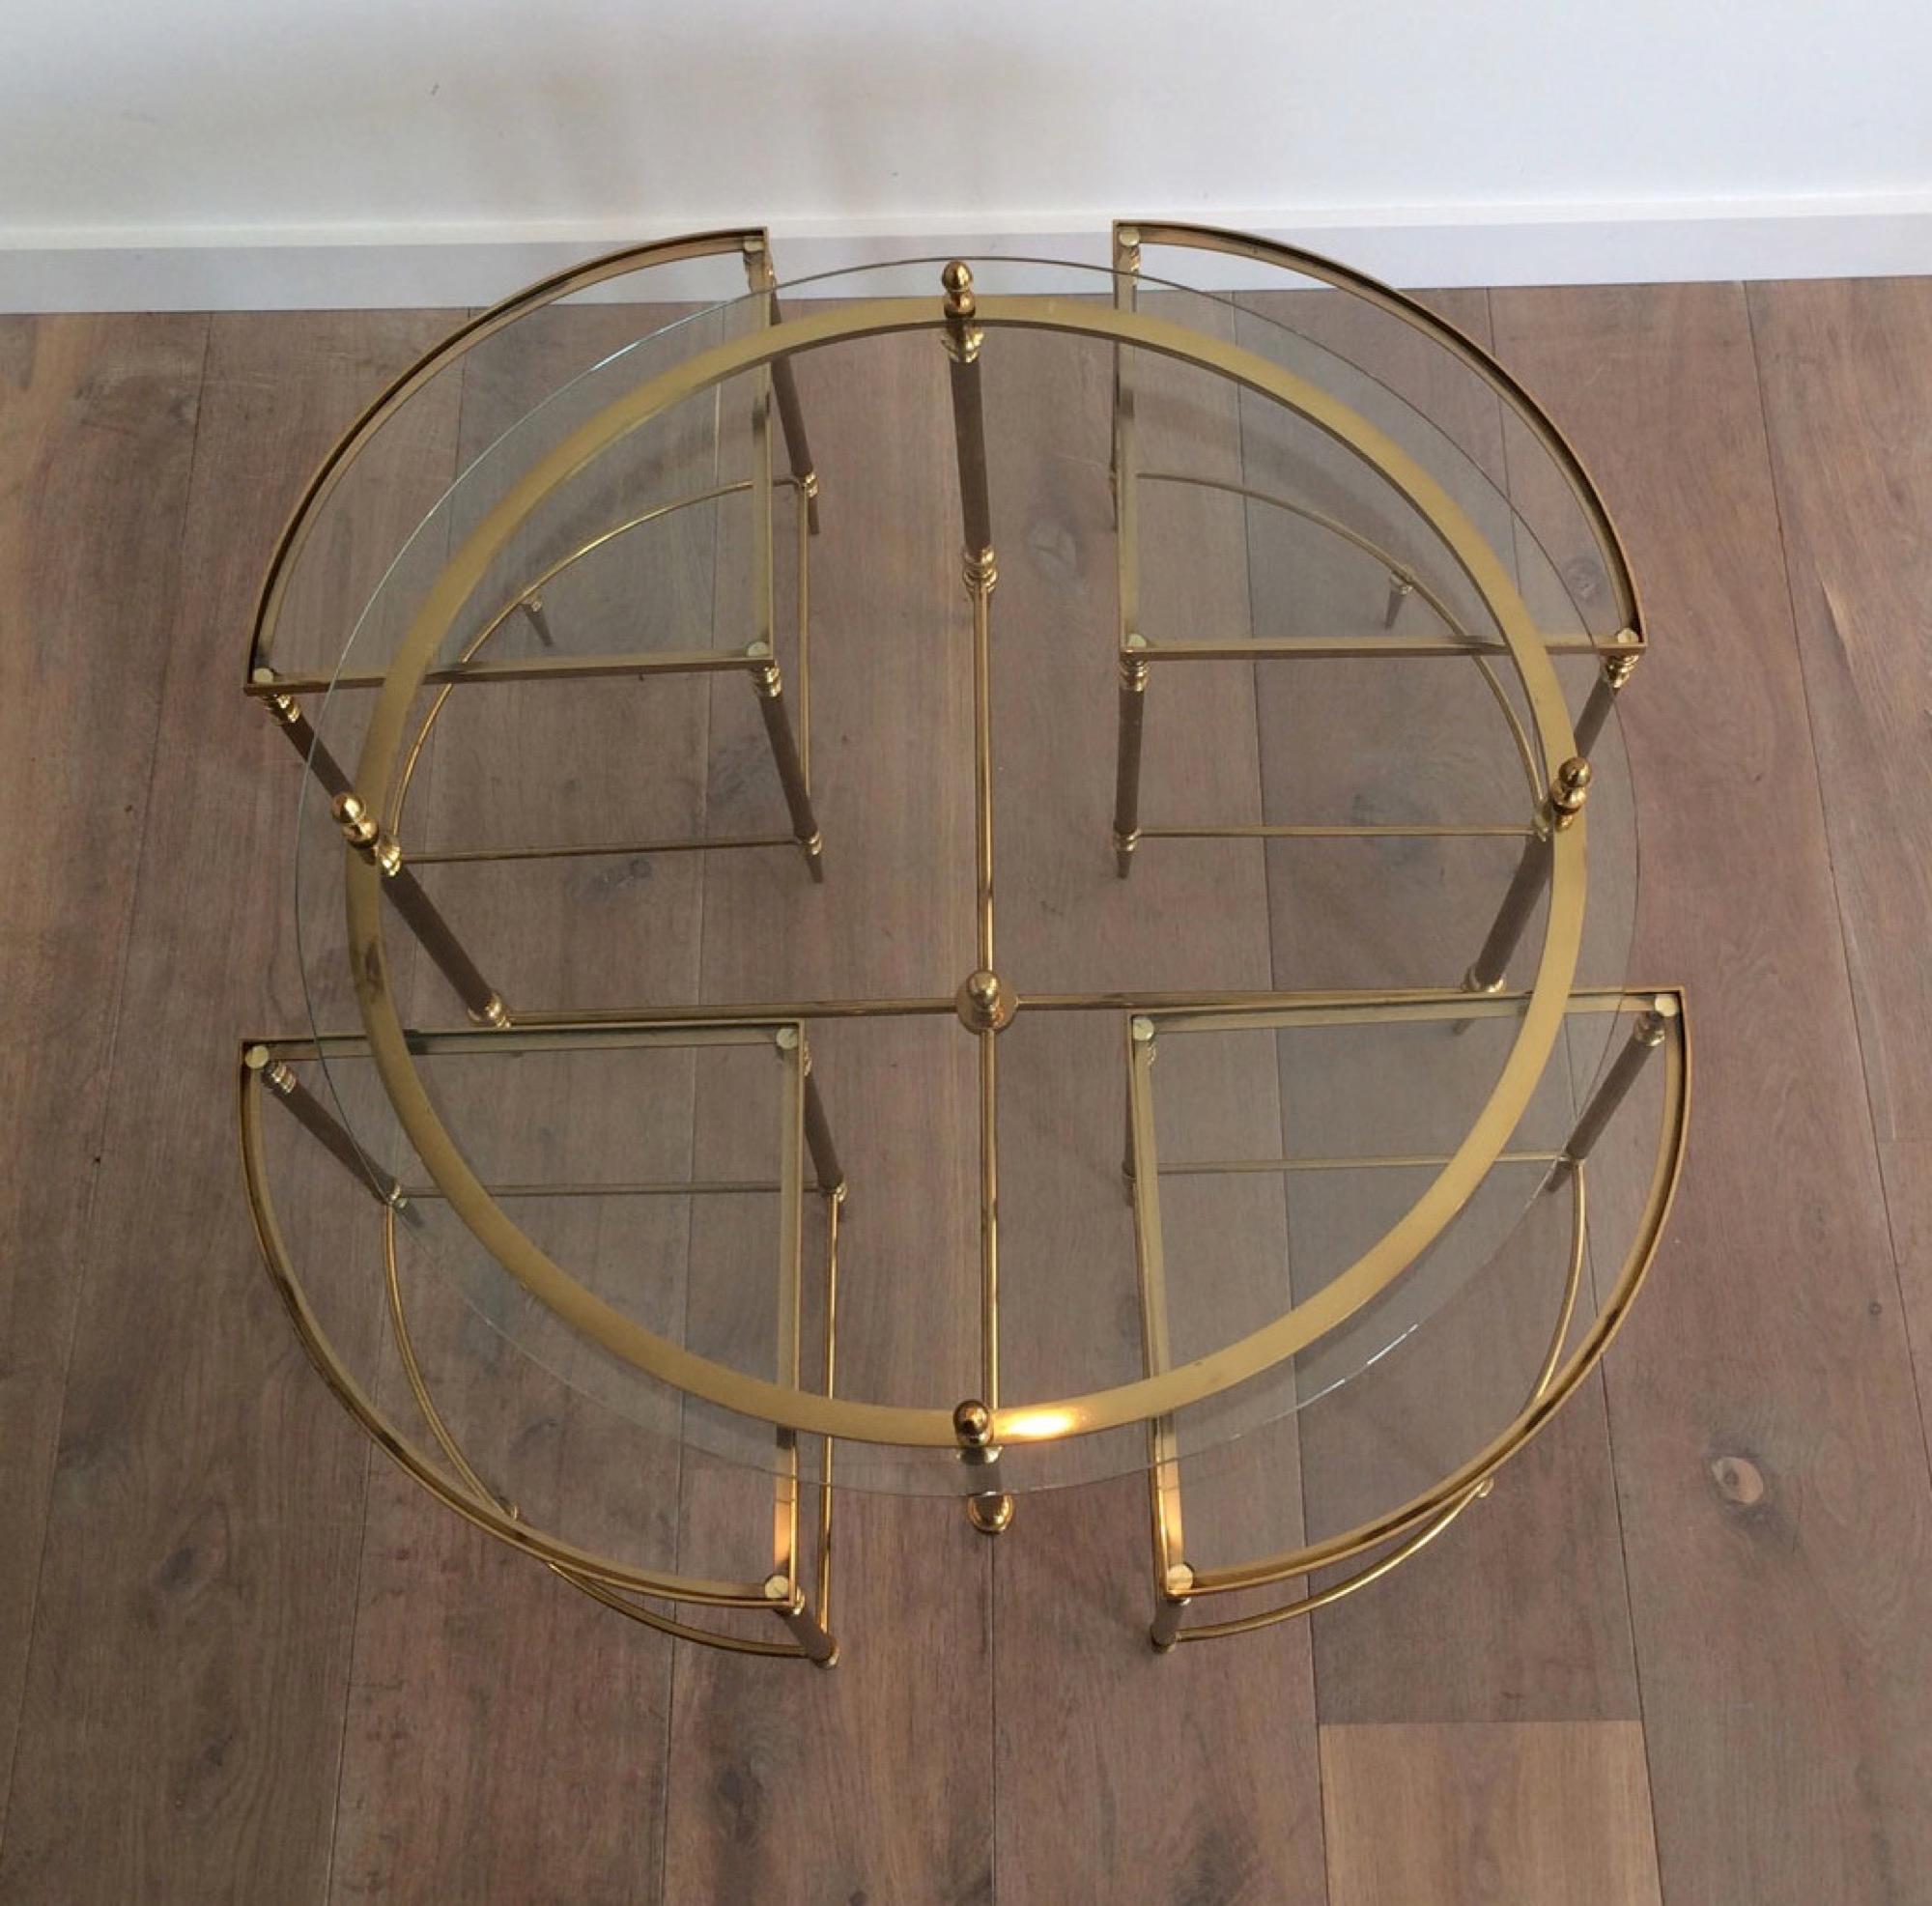 Mid-20th Century Neoclassical Round Brass Coffee Table with 4 Nesting Tables by Maison Baguès For Sale